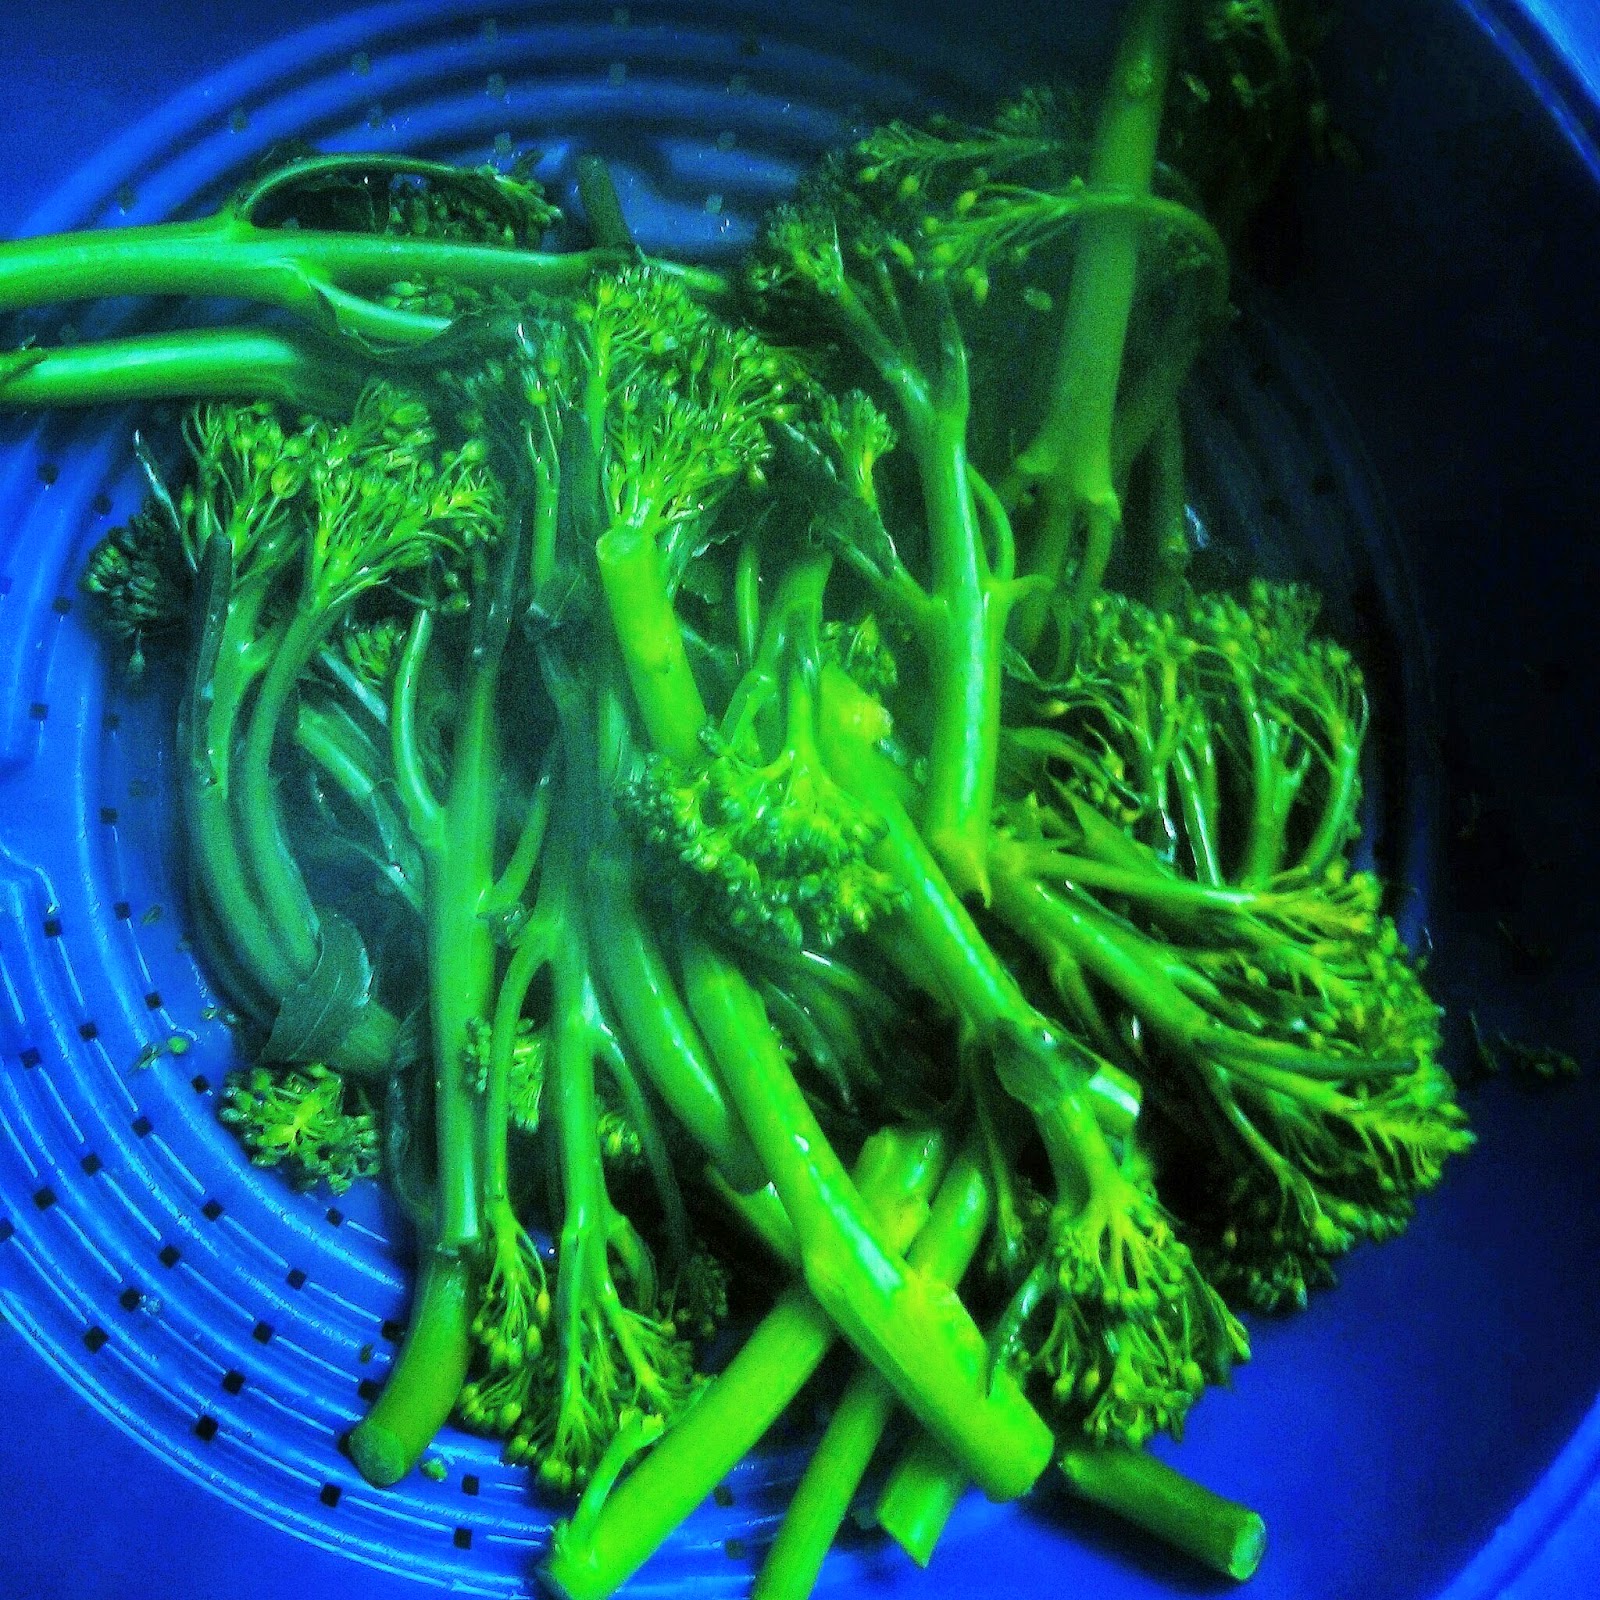 Tenderstem is nice and bright green when steamed!